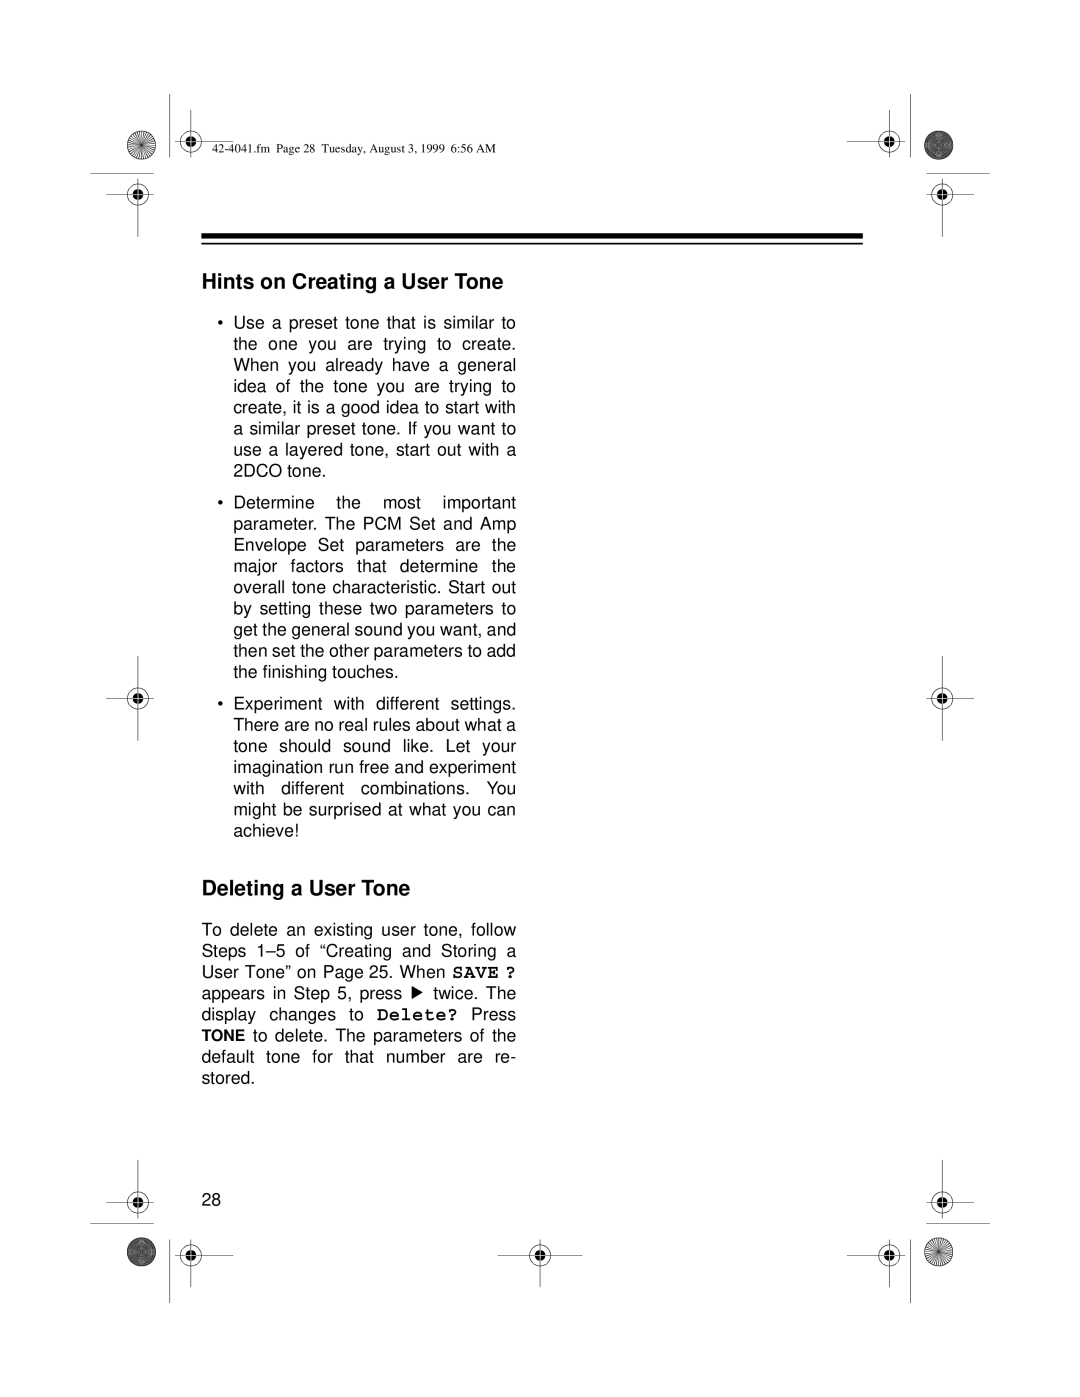 Optimus MD-1200 owner manual Hints on Creating a User Tone, Deleting a User Tone 